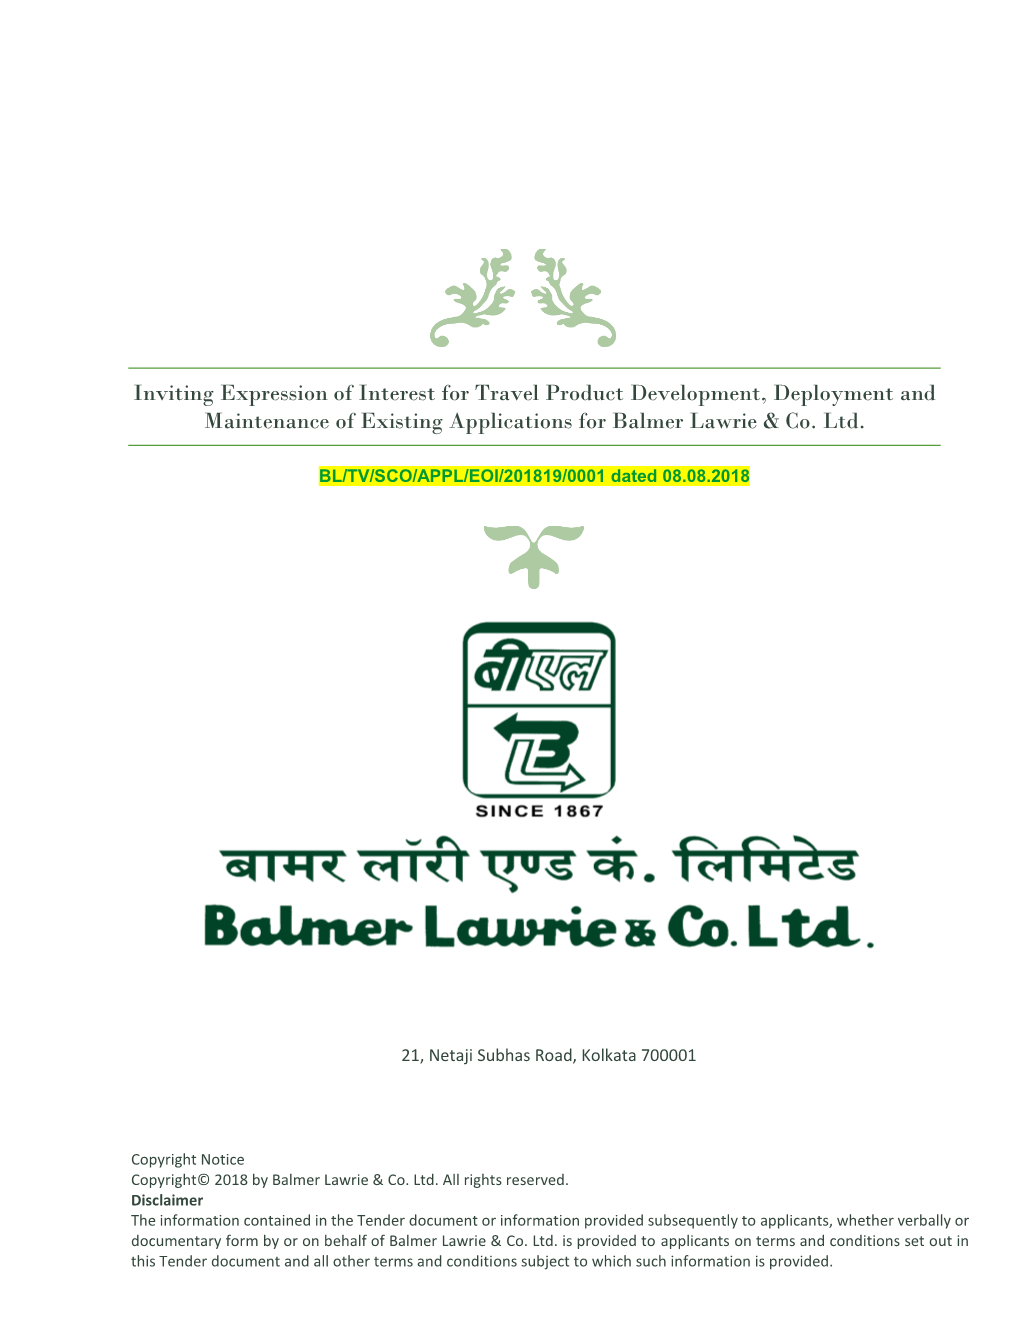 Inviting Expression of Interest for Travel Product Development, Deployment and Maintenance of Existing Applications for Balmer Lawrie & Co